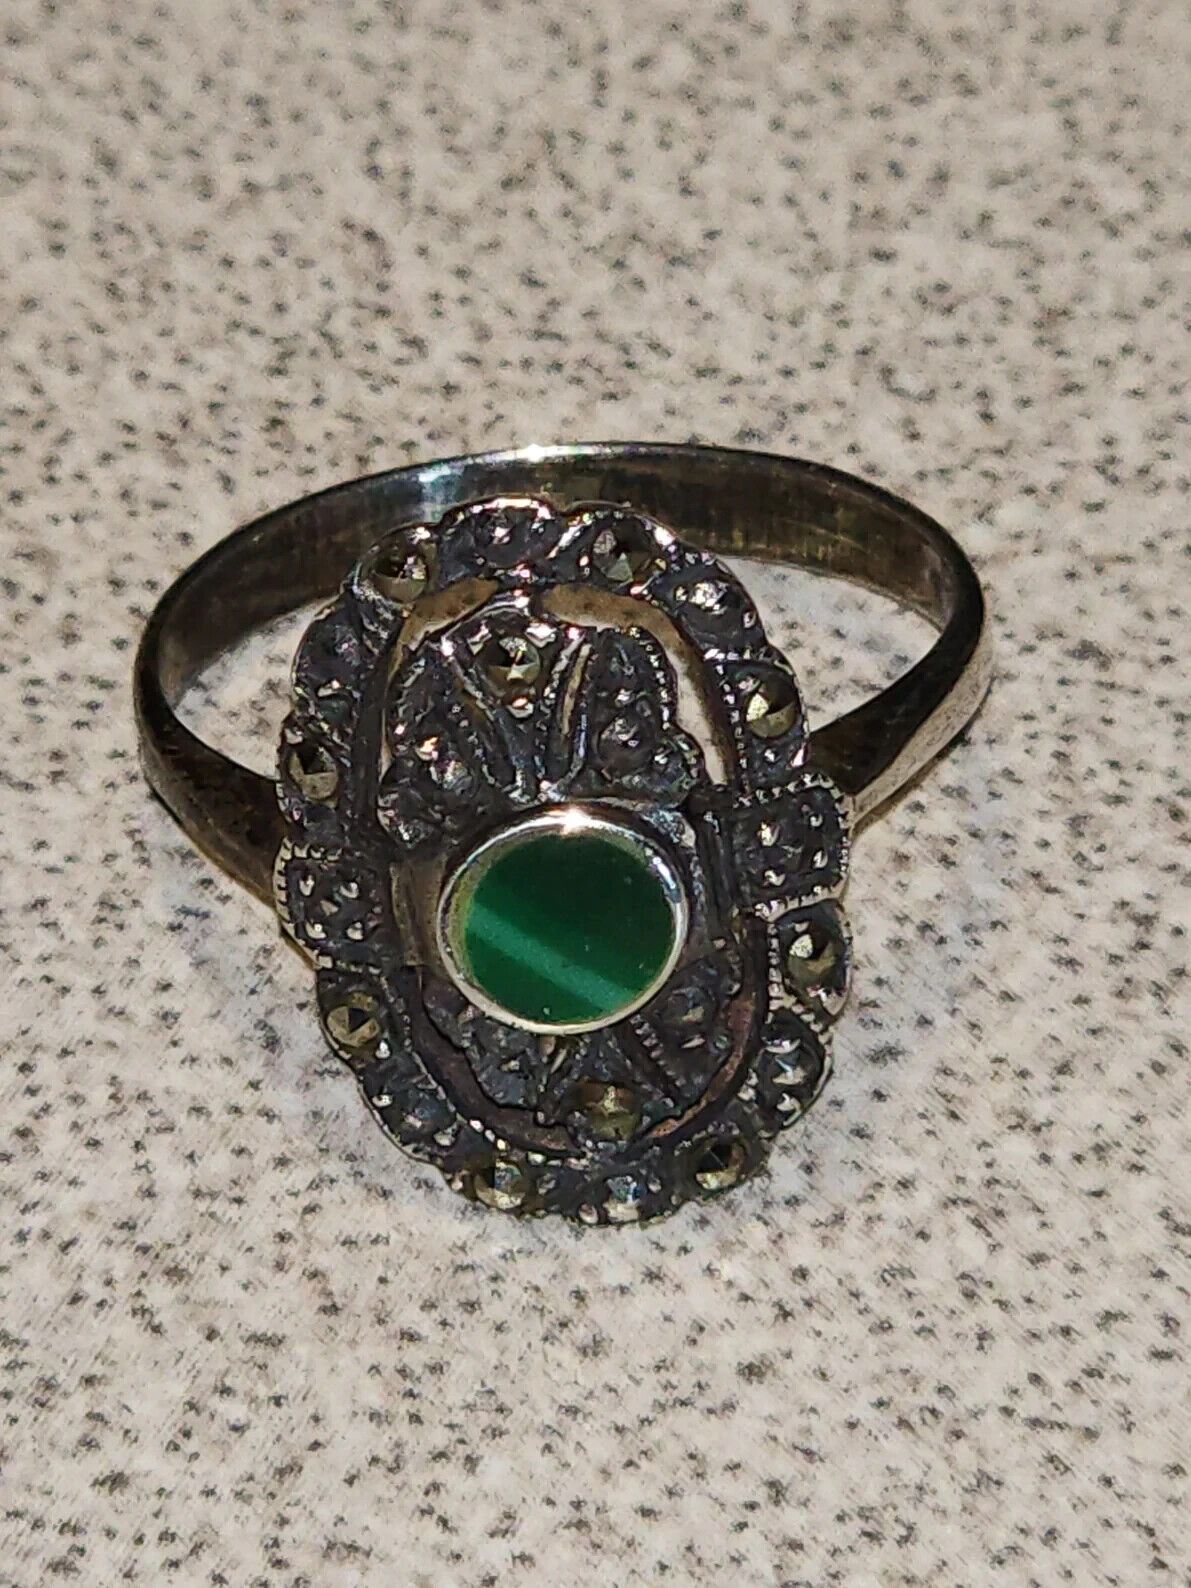 Vintage Marcasite and Green Onyx Sterling Silver Ring, Size 7.75, Imported from